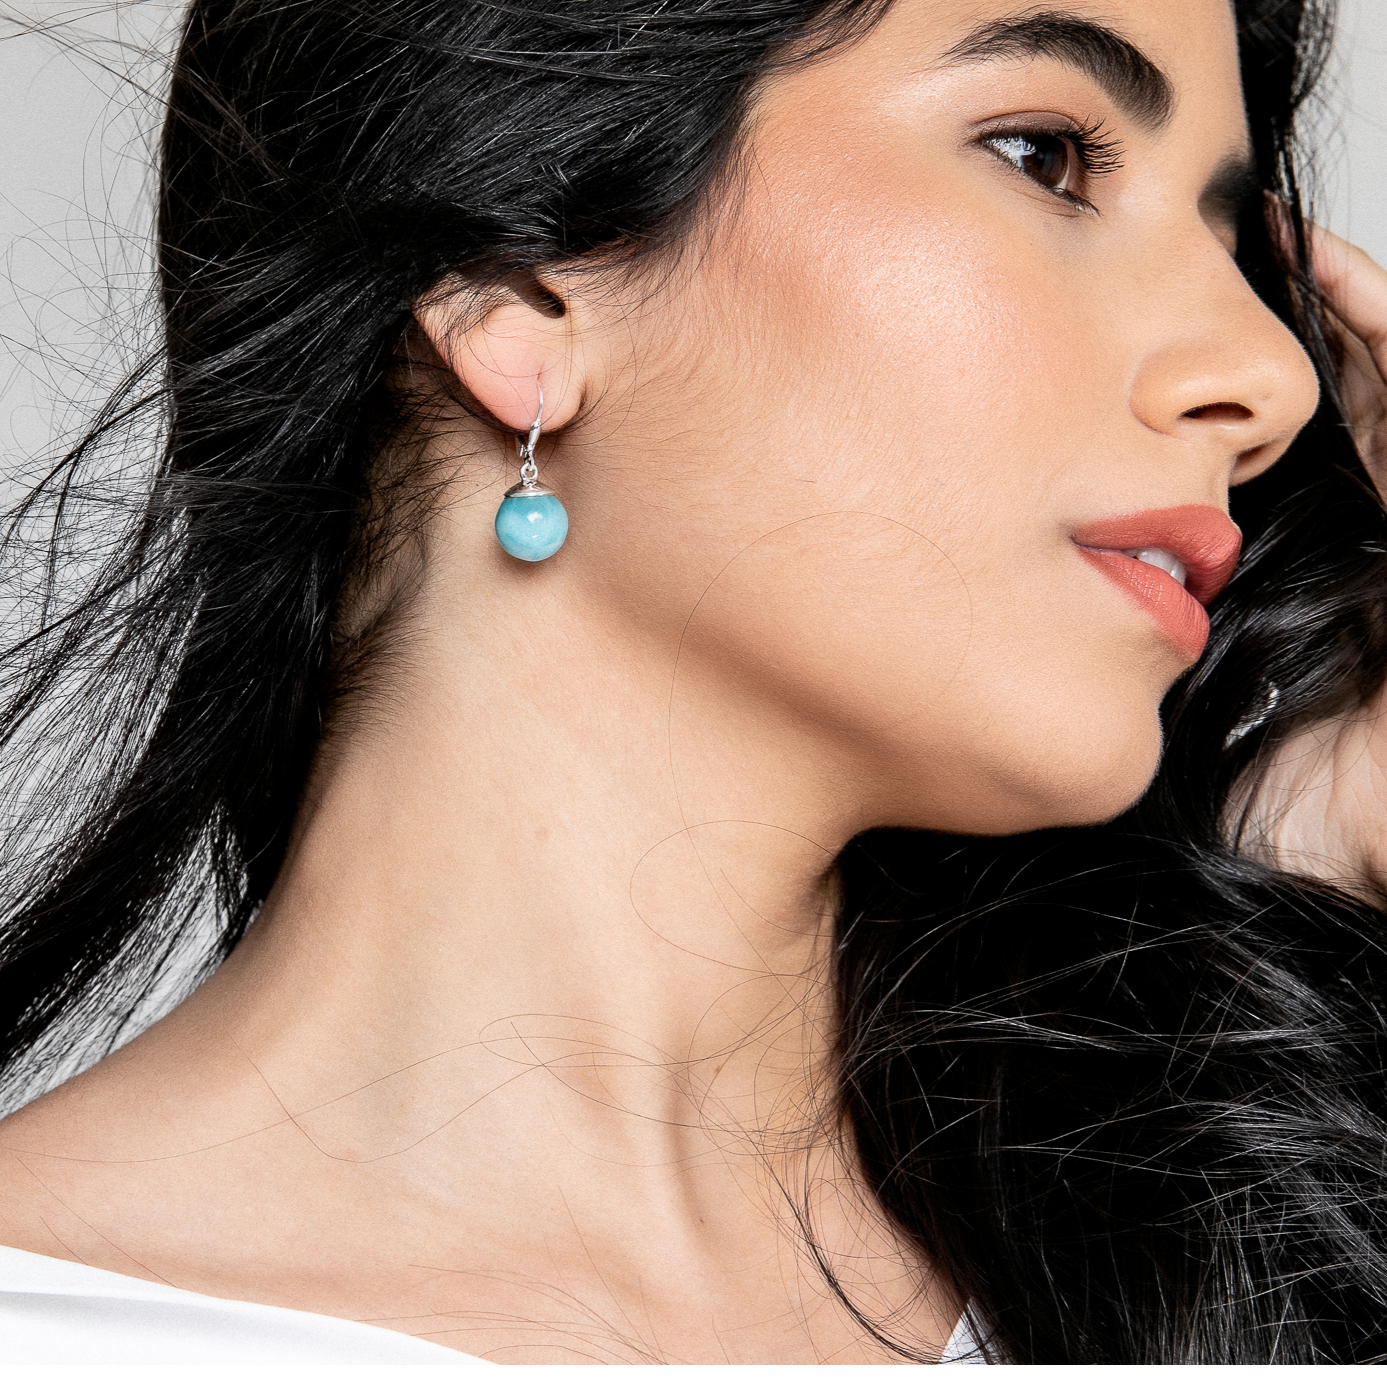 These larimar round bead dangle earrings are the perfect combination of beauty and functionality. The lightweight design makes them comfortable to wear all day long, while the stunning larimar stones add a touch of elegance and style.